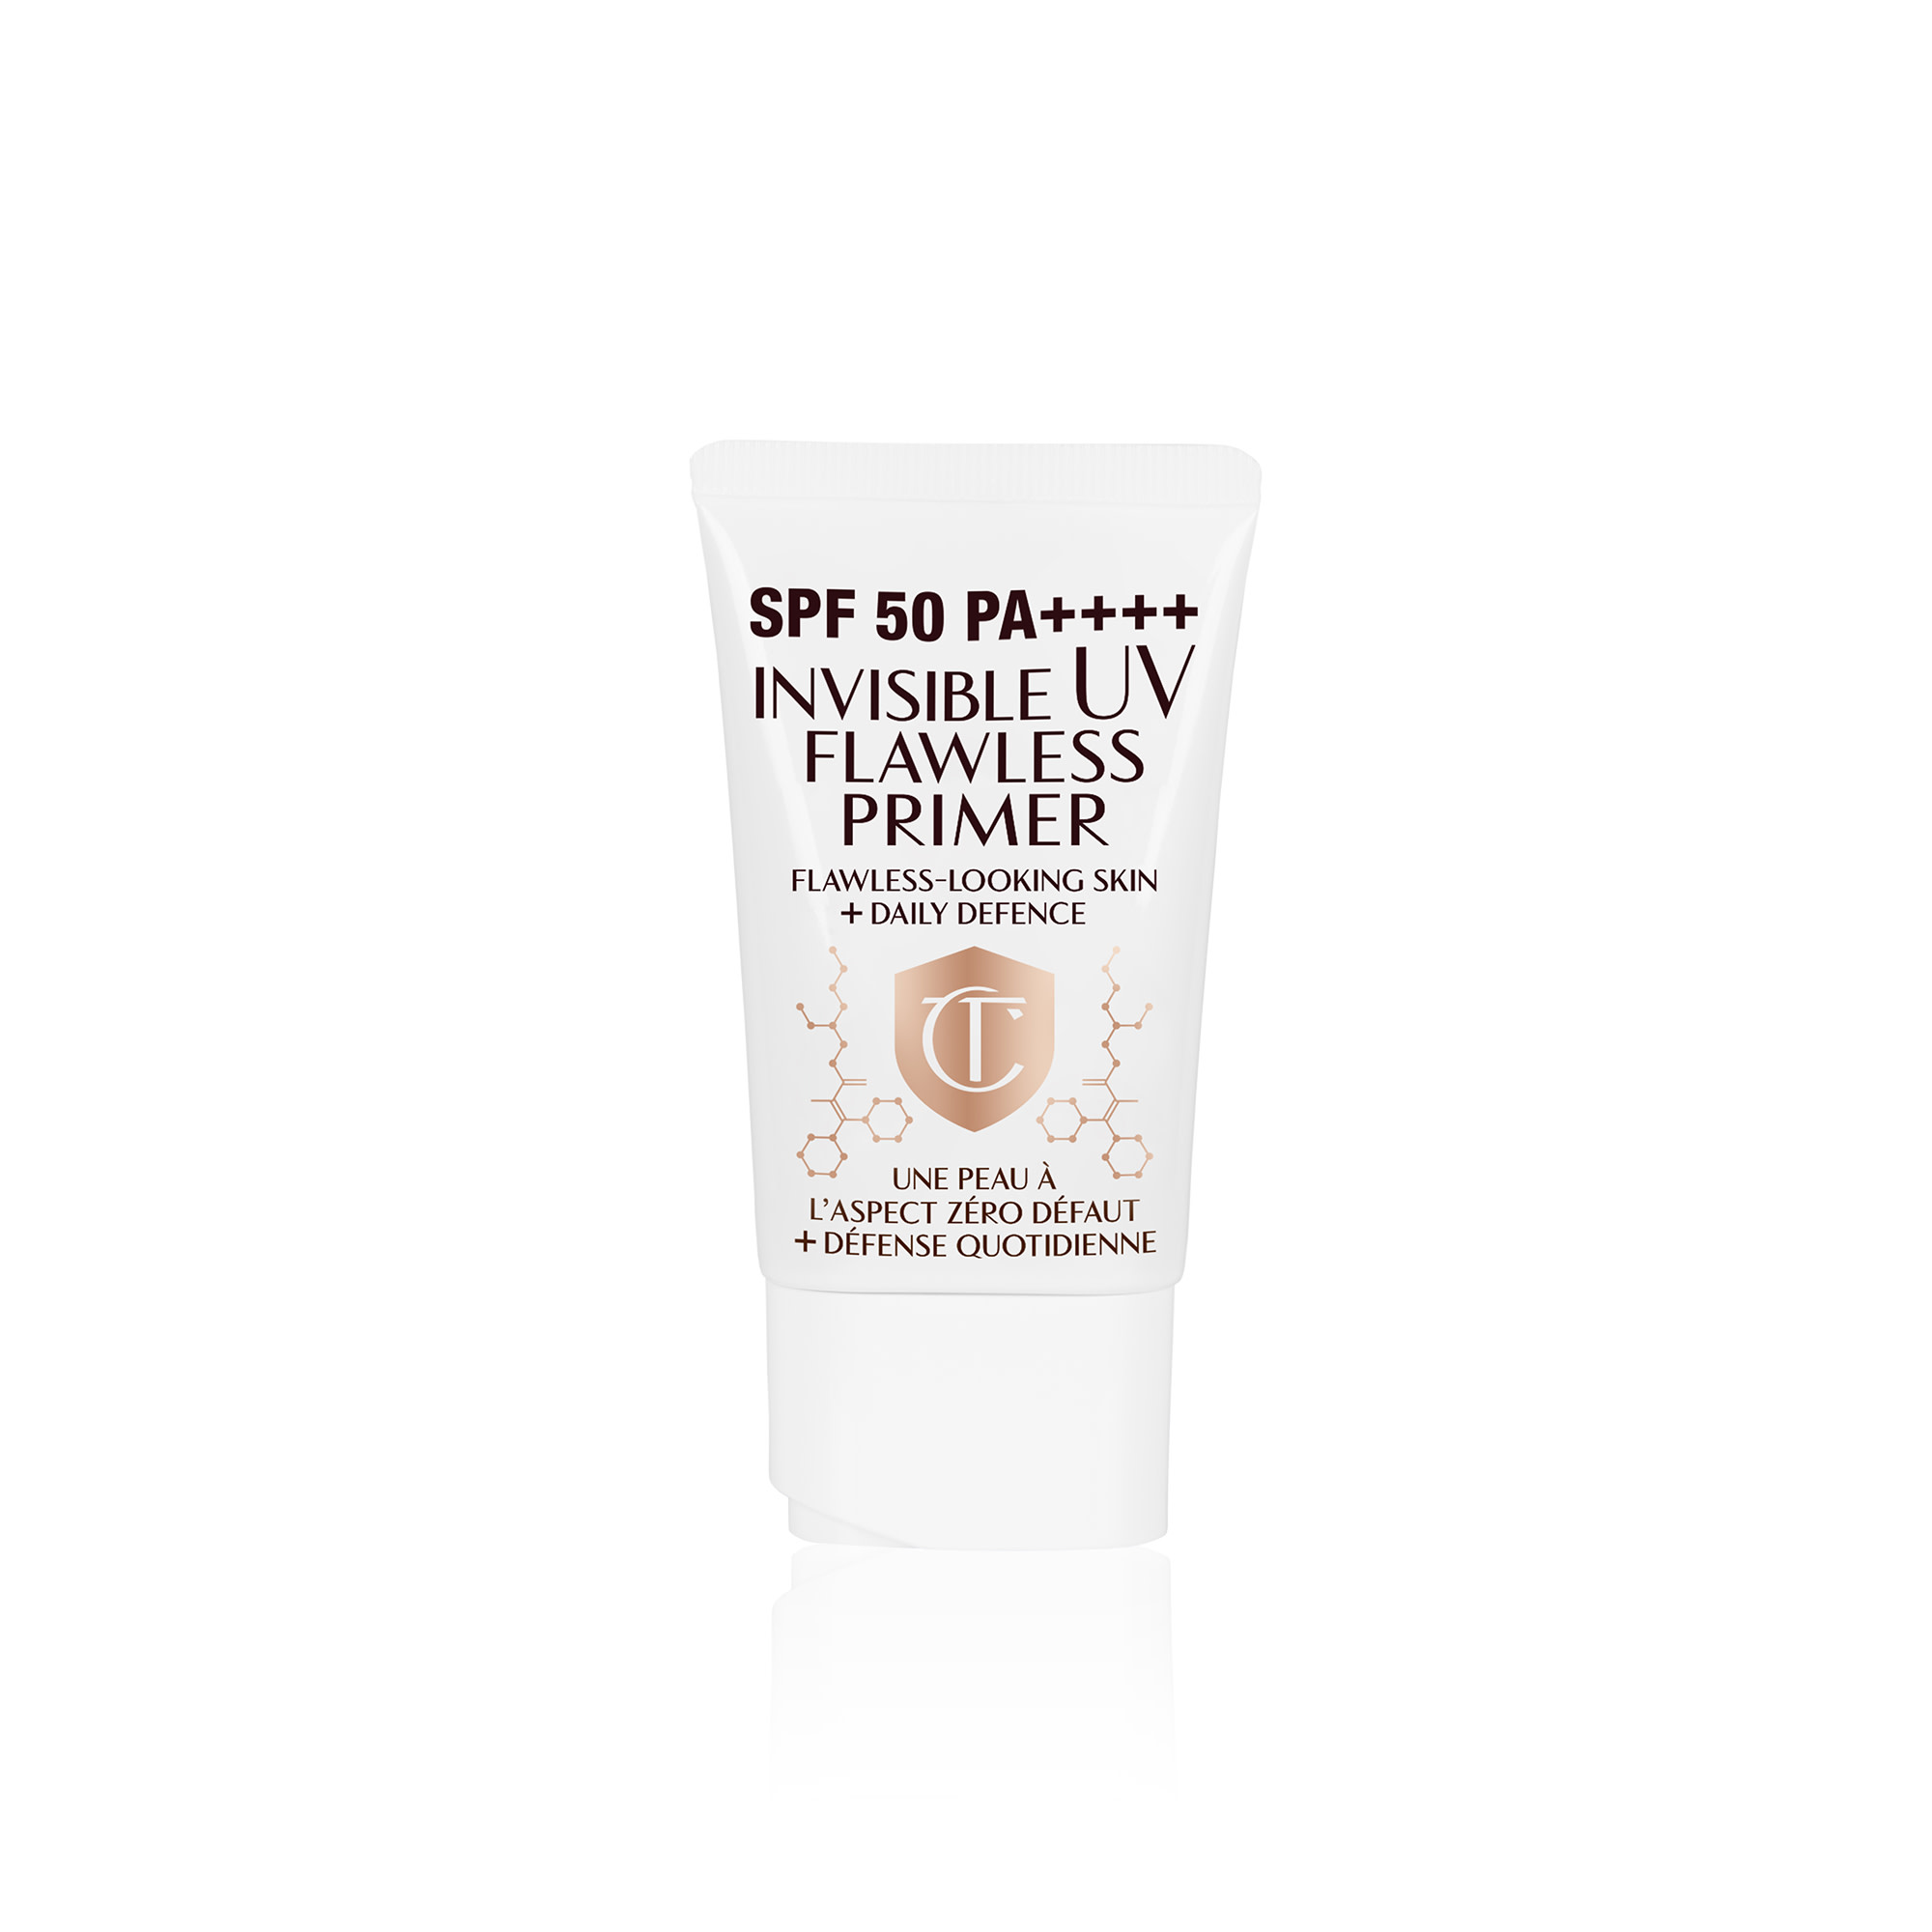 A primer in a white-coloured tube with a white-coloured lid with text on it that reads, 'invisible UV Flawless poreless primer SPF 50 PA++++'.